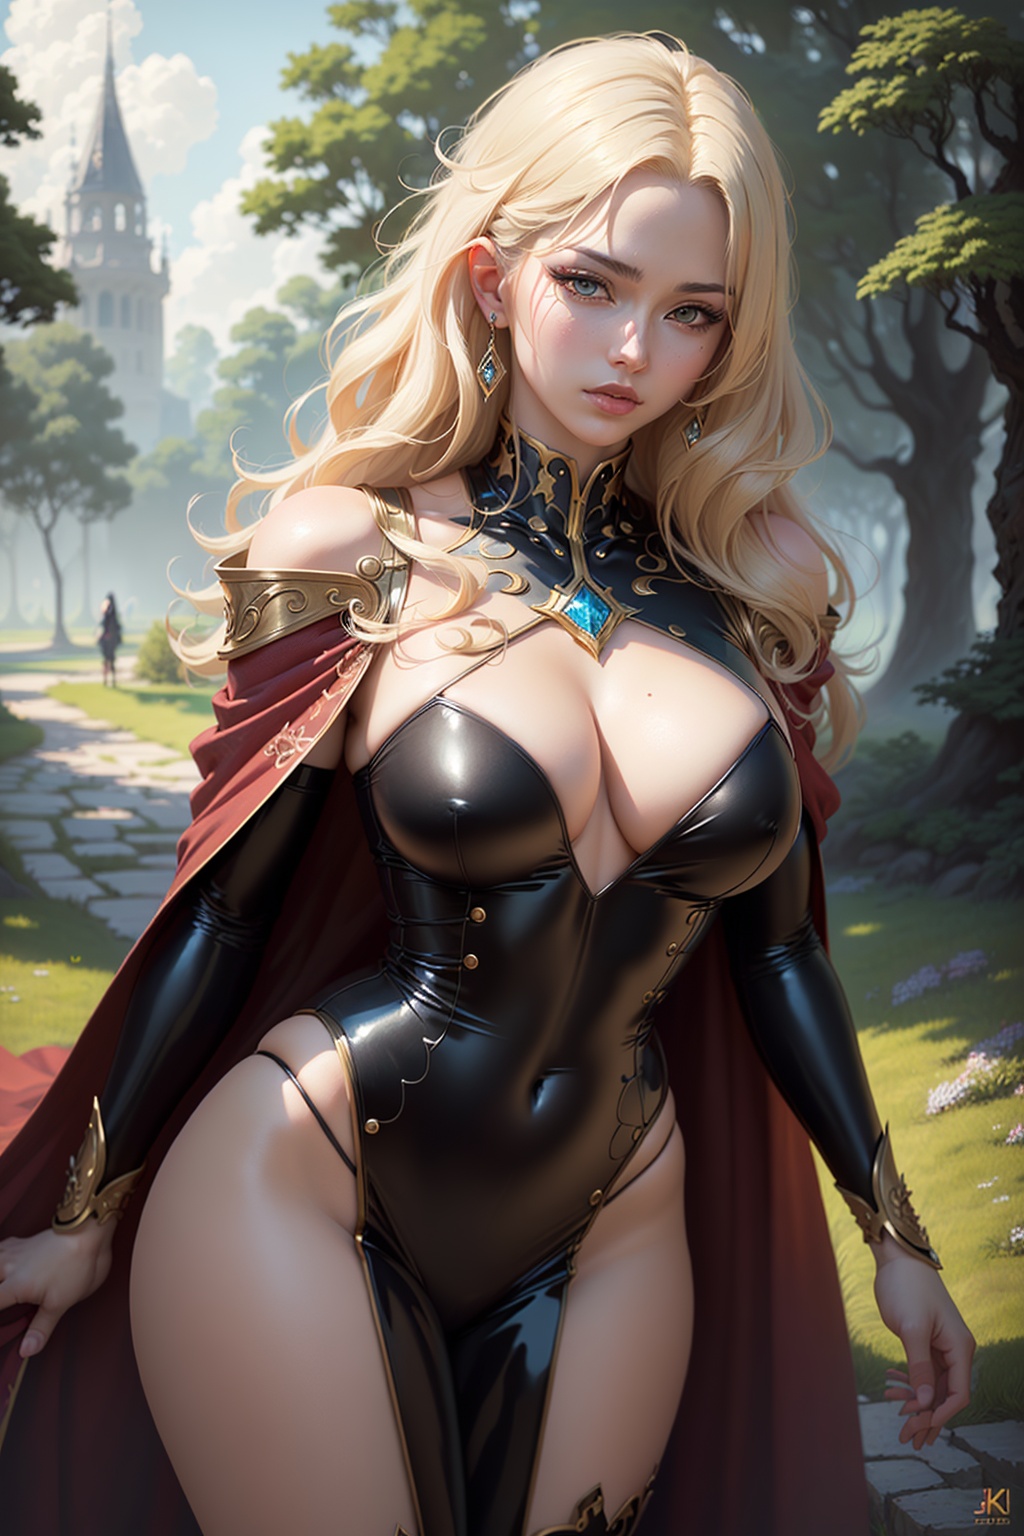 ((best quality)), ((masterpiece)), (detailed), woman in latex outfit, striking pose, (Yang J:1.2), (fantasy art:1.1), (realistic anime art style:1.3), serene park background, elegant robe, intricate detailing, (extremely high details:1.3), (8k resolution:1.2)